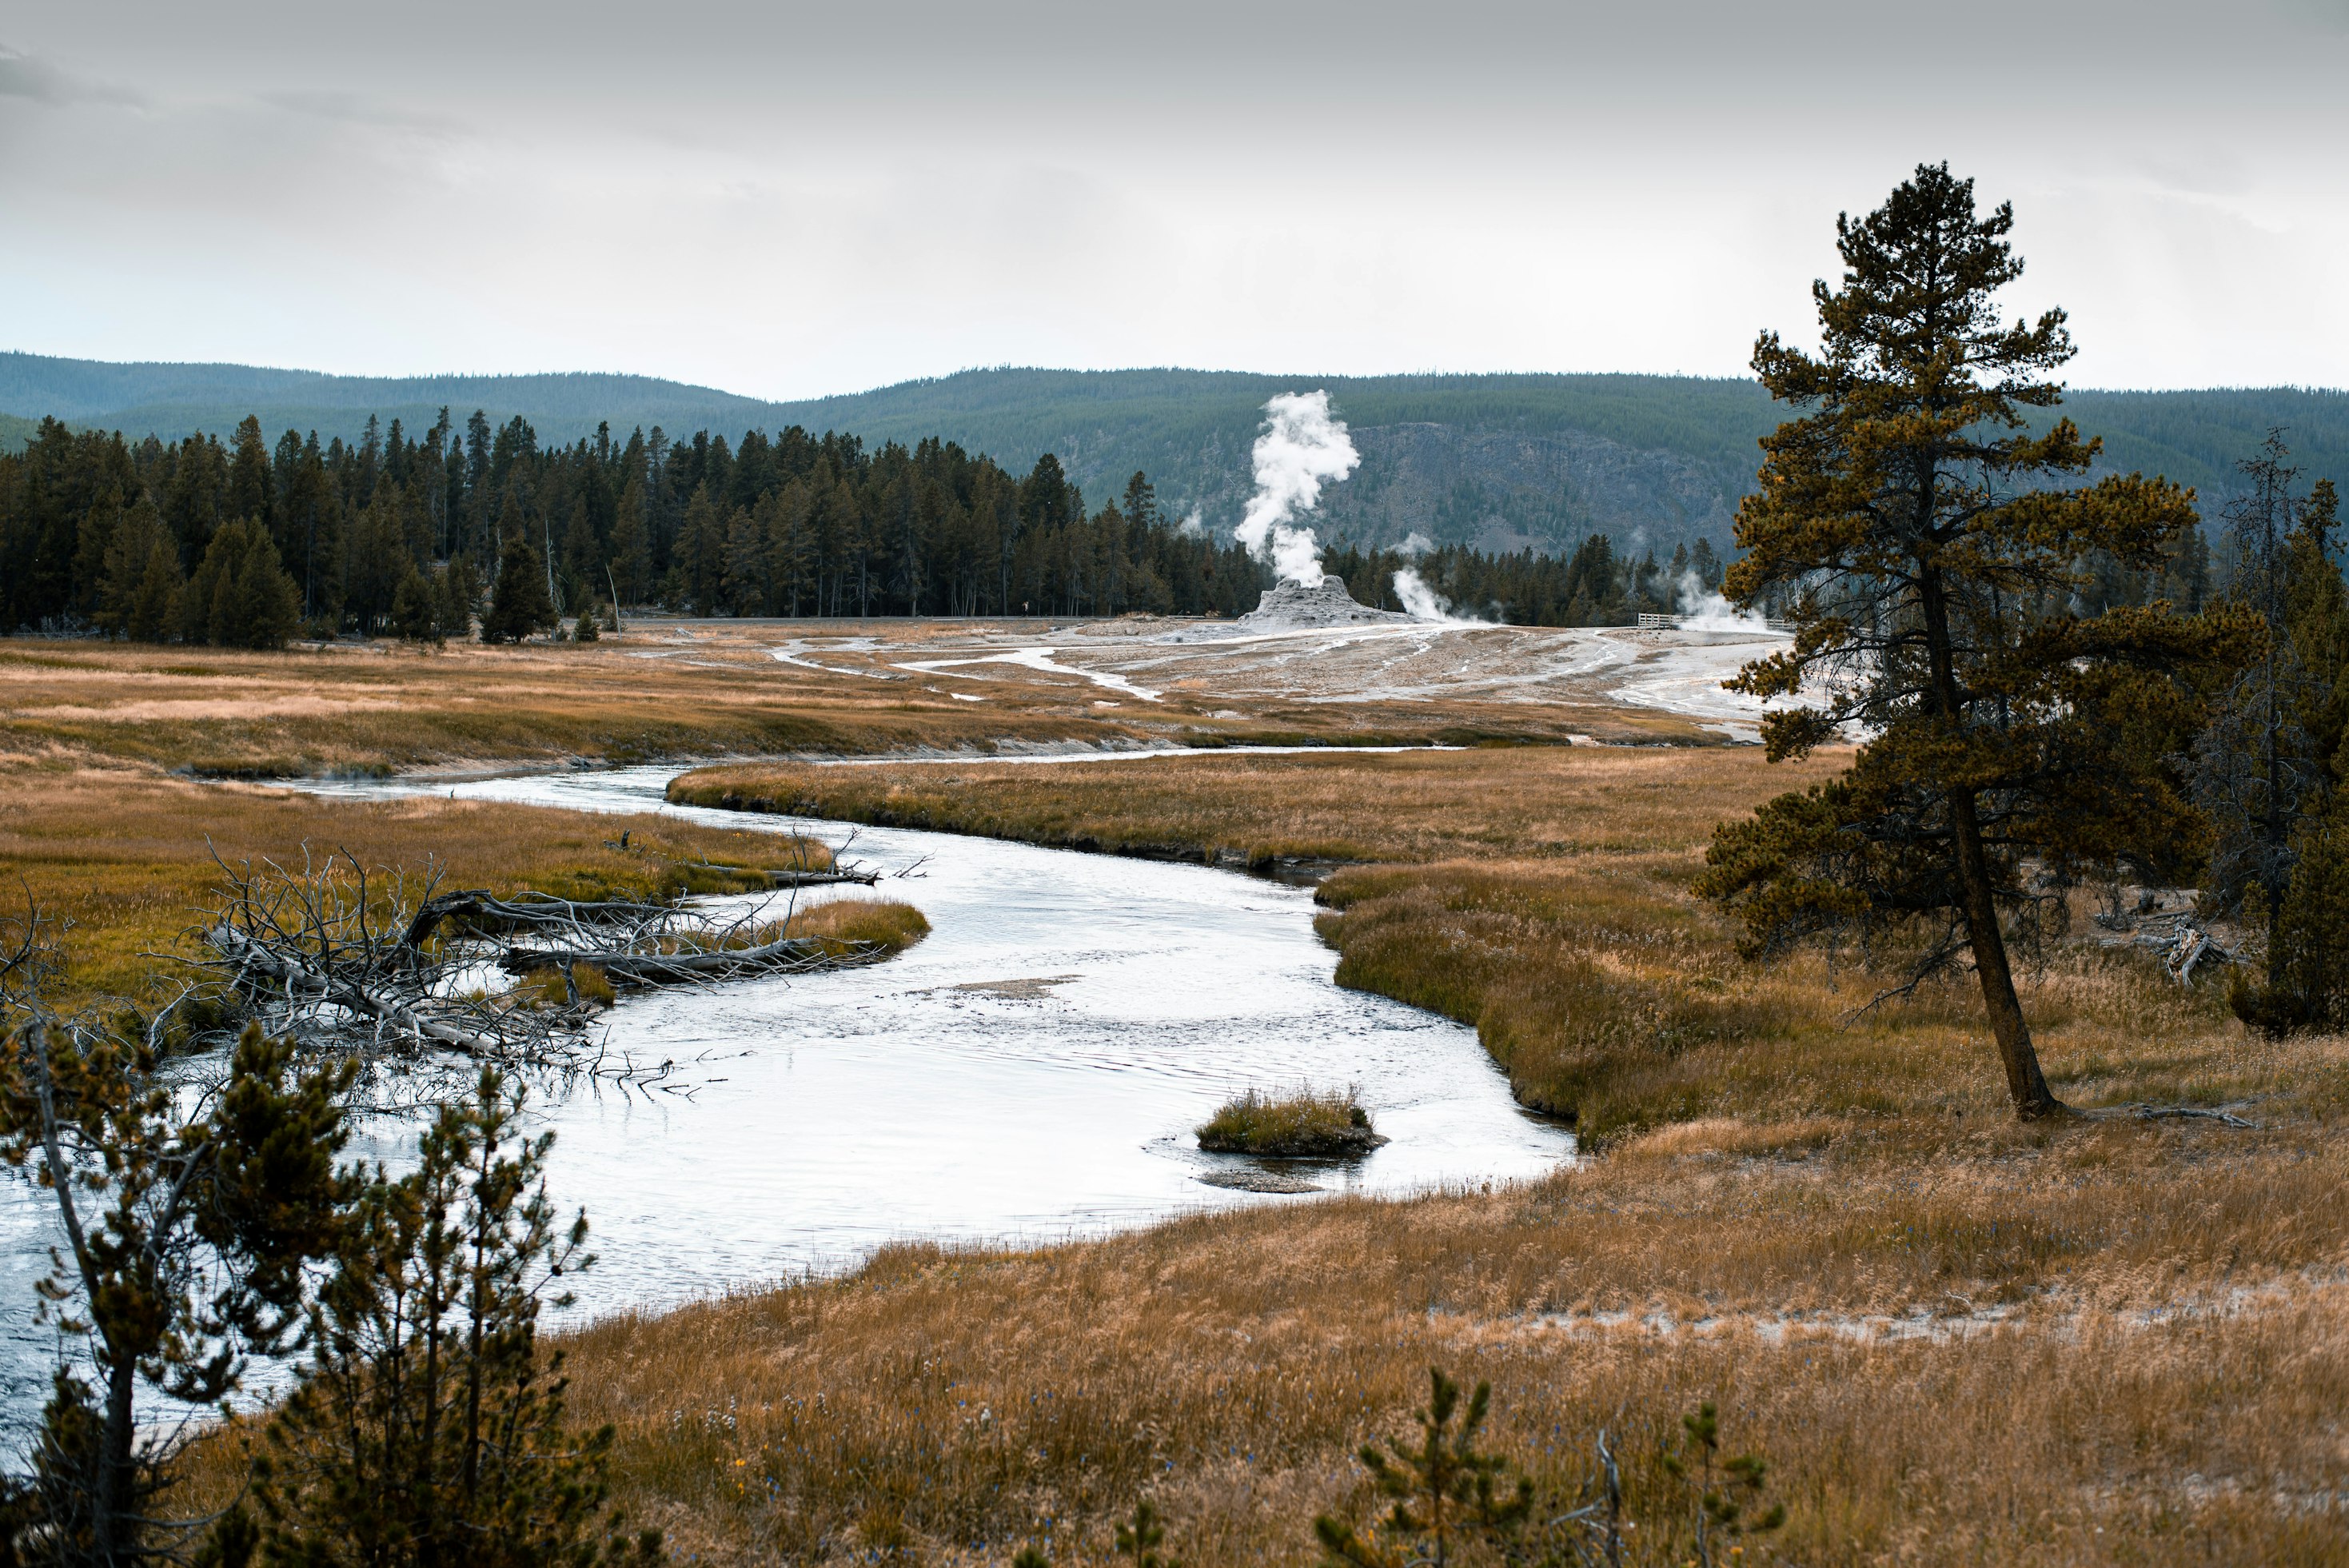 Yellowstone Supervolcano Contains More Magma, New Study Finds